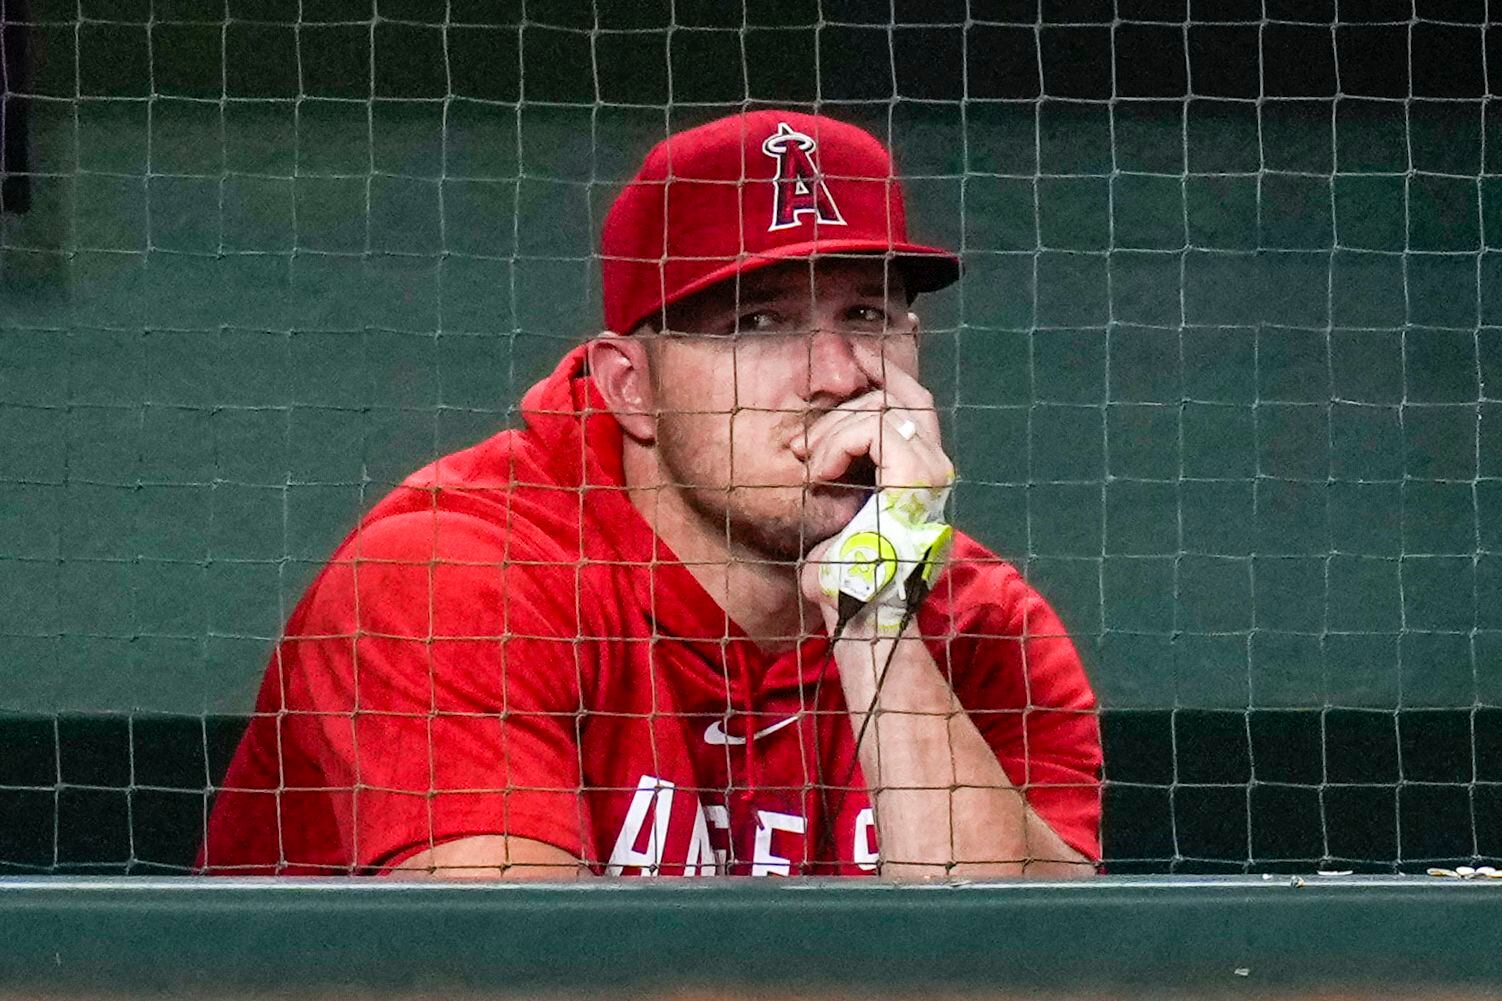 Mike Trout breaks Angels record with his 300th home run - Halos Heaven